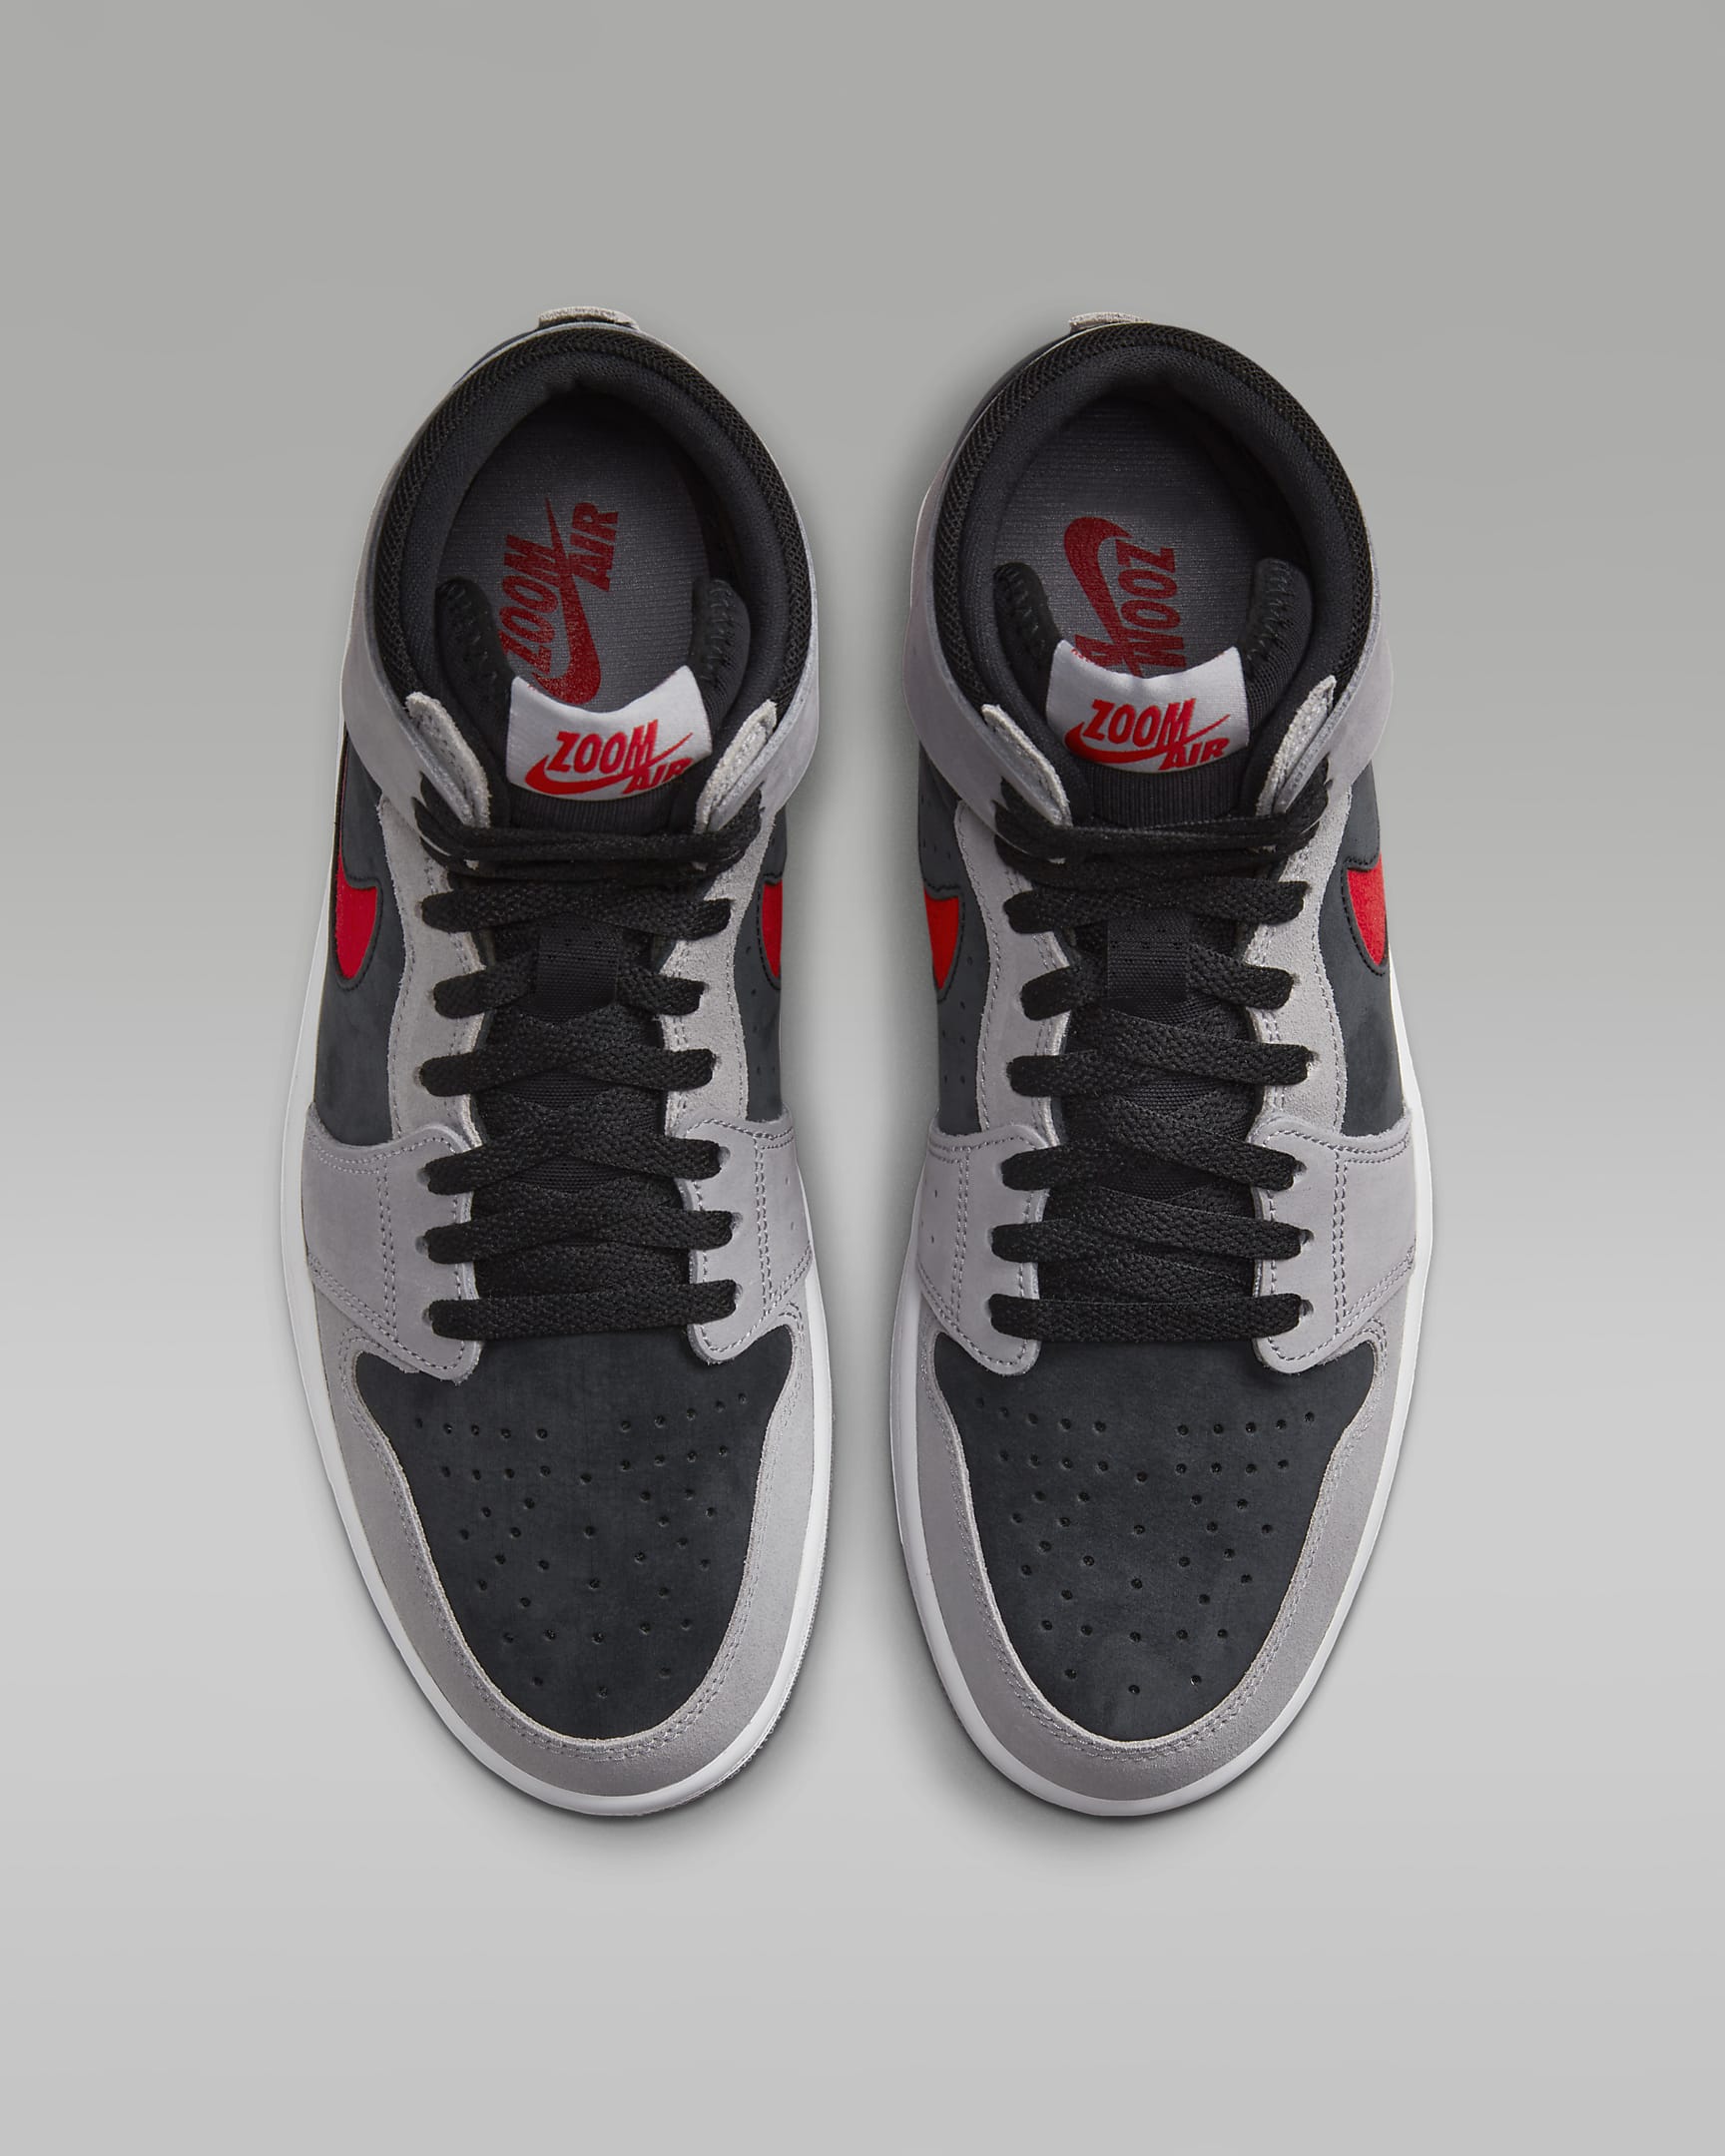 Don’t Miss Out: The Ultimate Guide to Rocking Air Jordan 1 Zoom CMFT 2 Men’s Shoes Like a Pro!